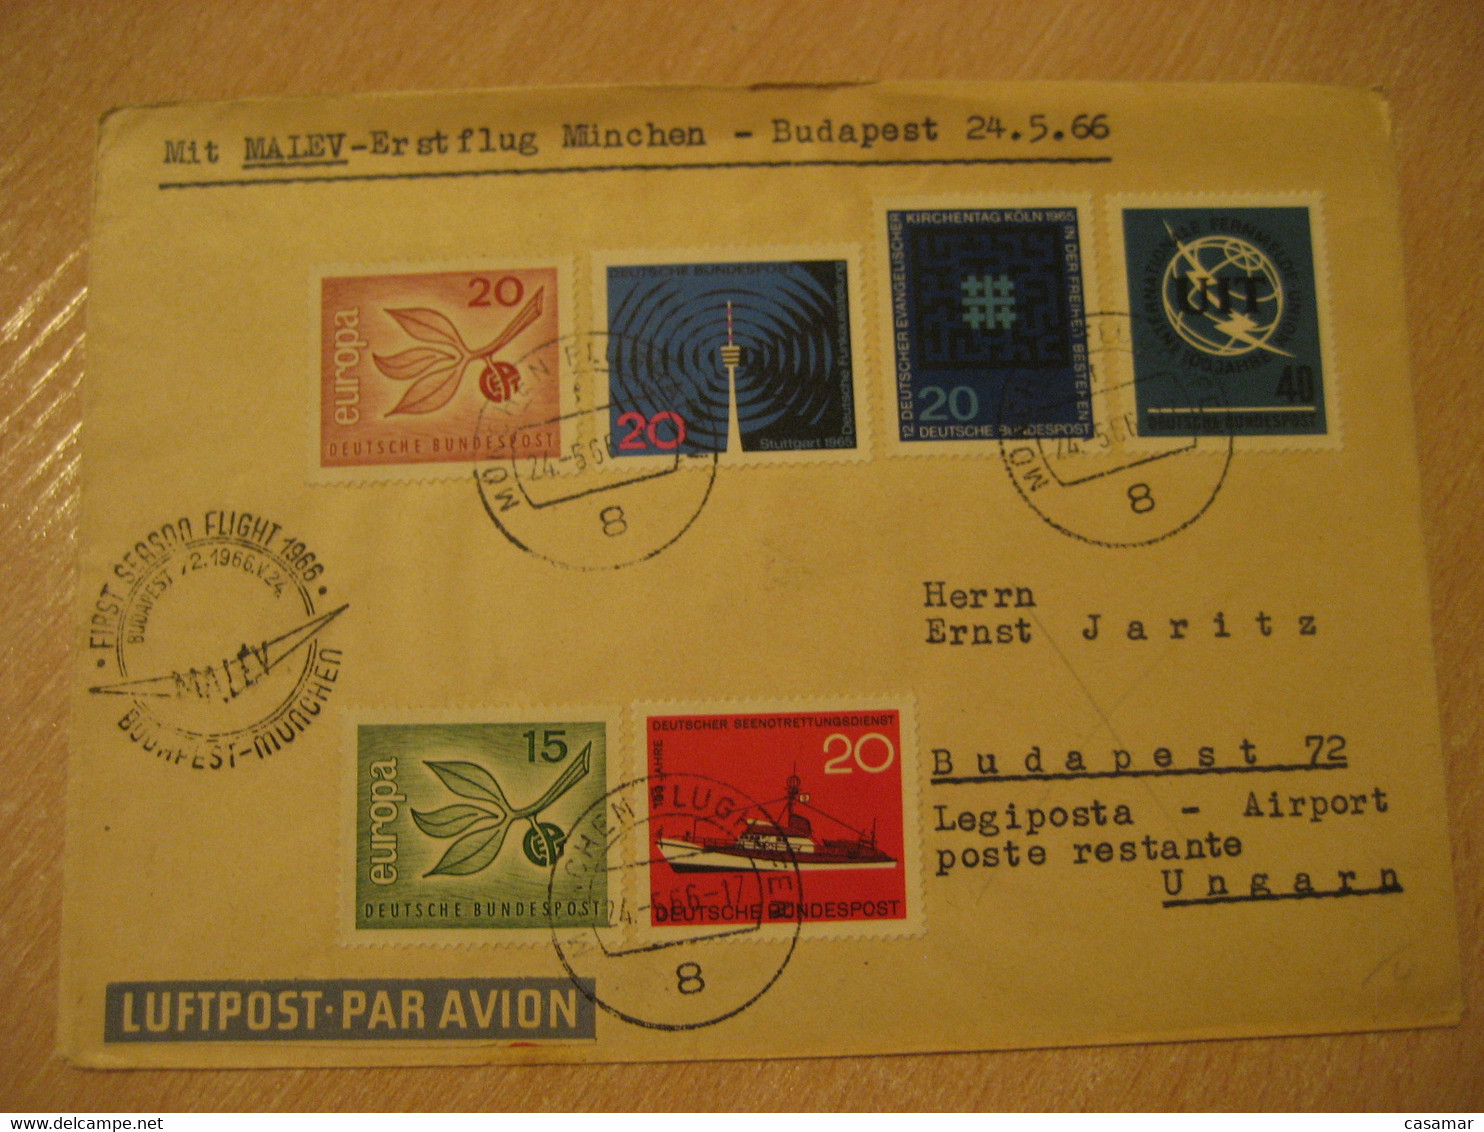 BUDAPEST Munich 1966 MALEV Airlines Airline First Season Flight Cancel Cover HUNGARY GERMANY - Briefe U. Dokumente